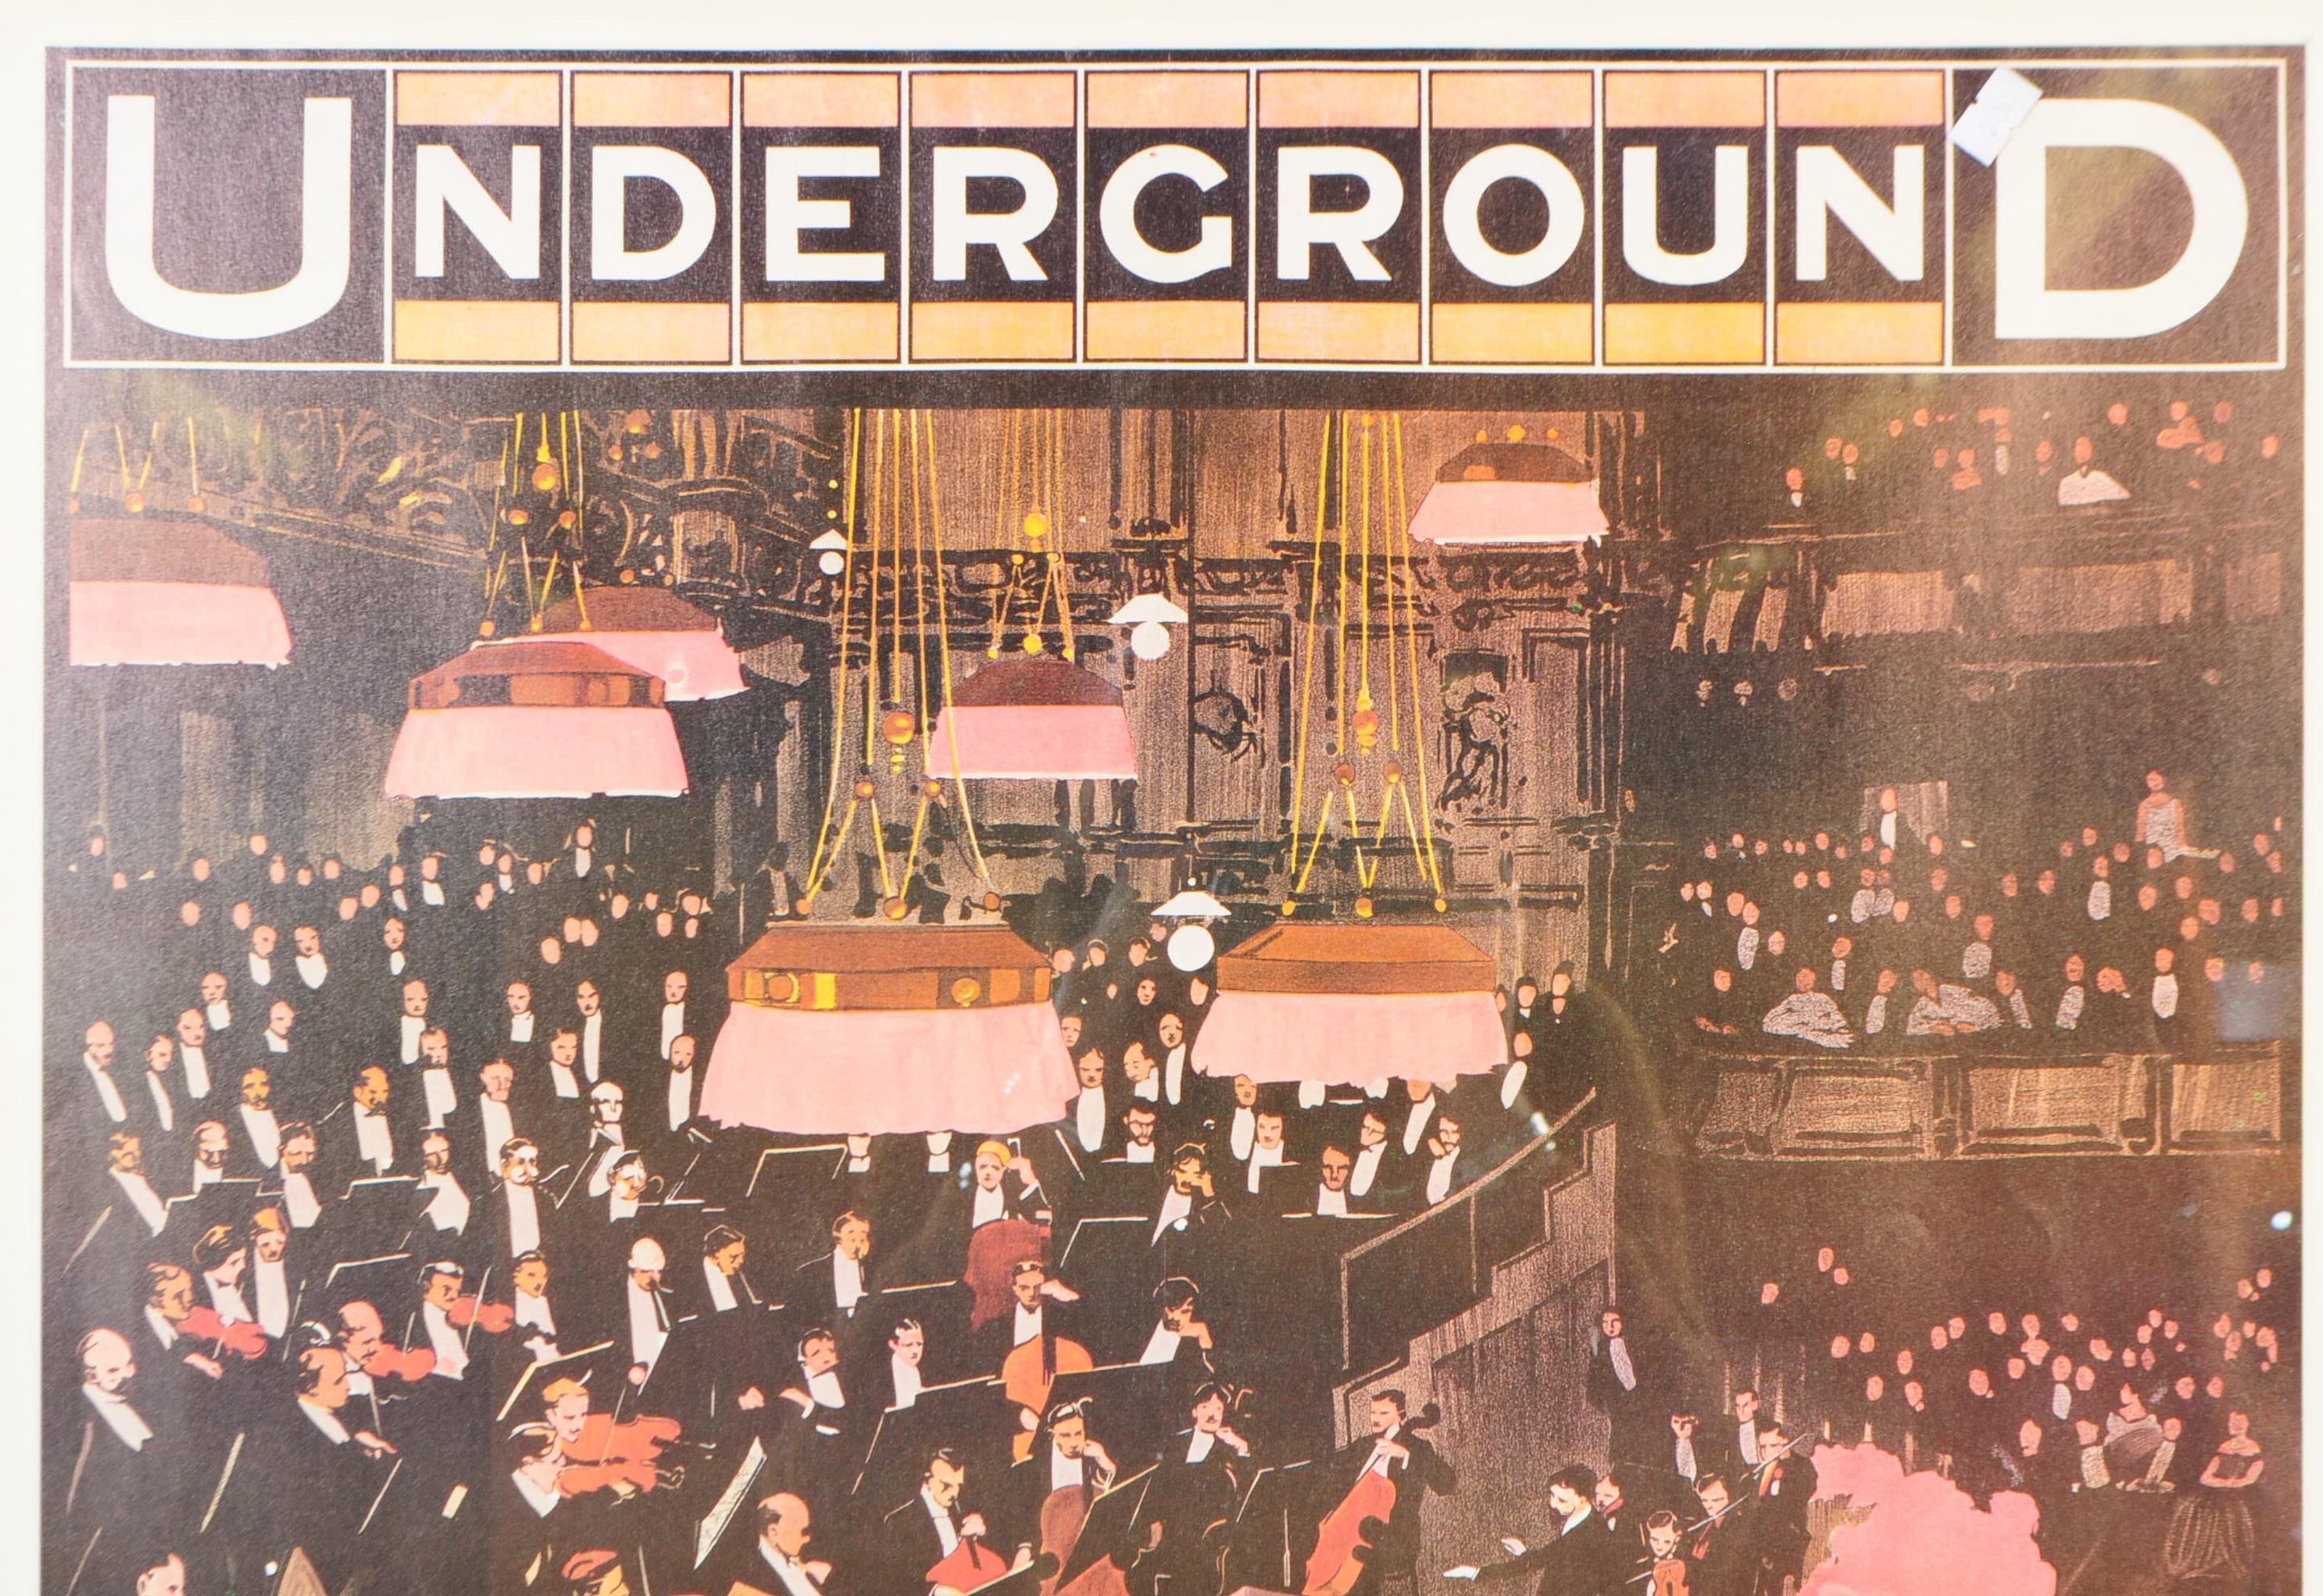 1980S FRED TAYLOR UNDERGROUND POSTER - Image 3 of 8